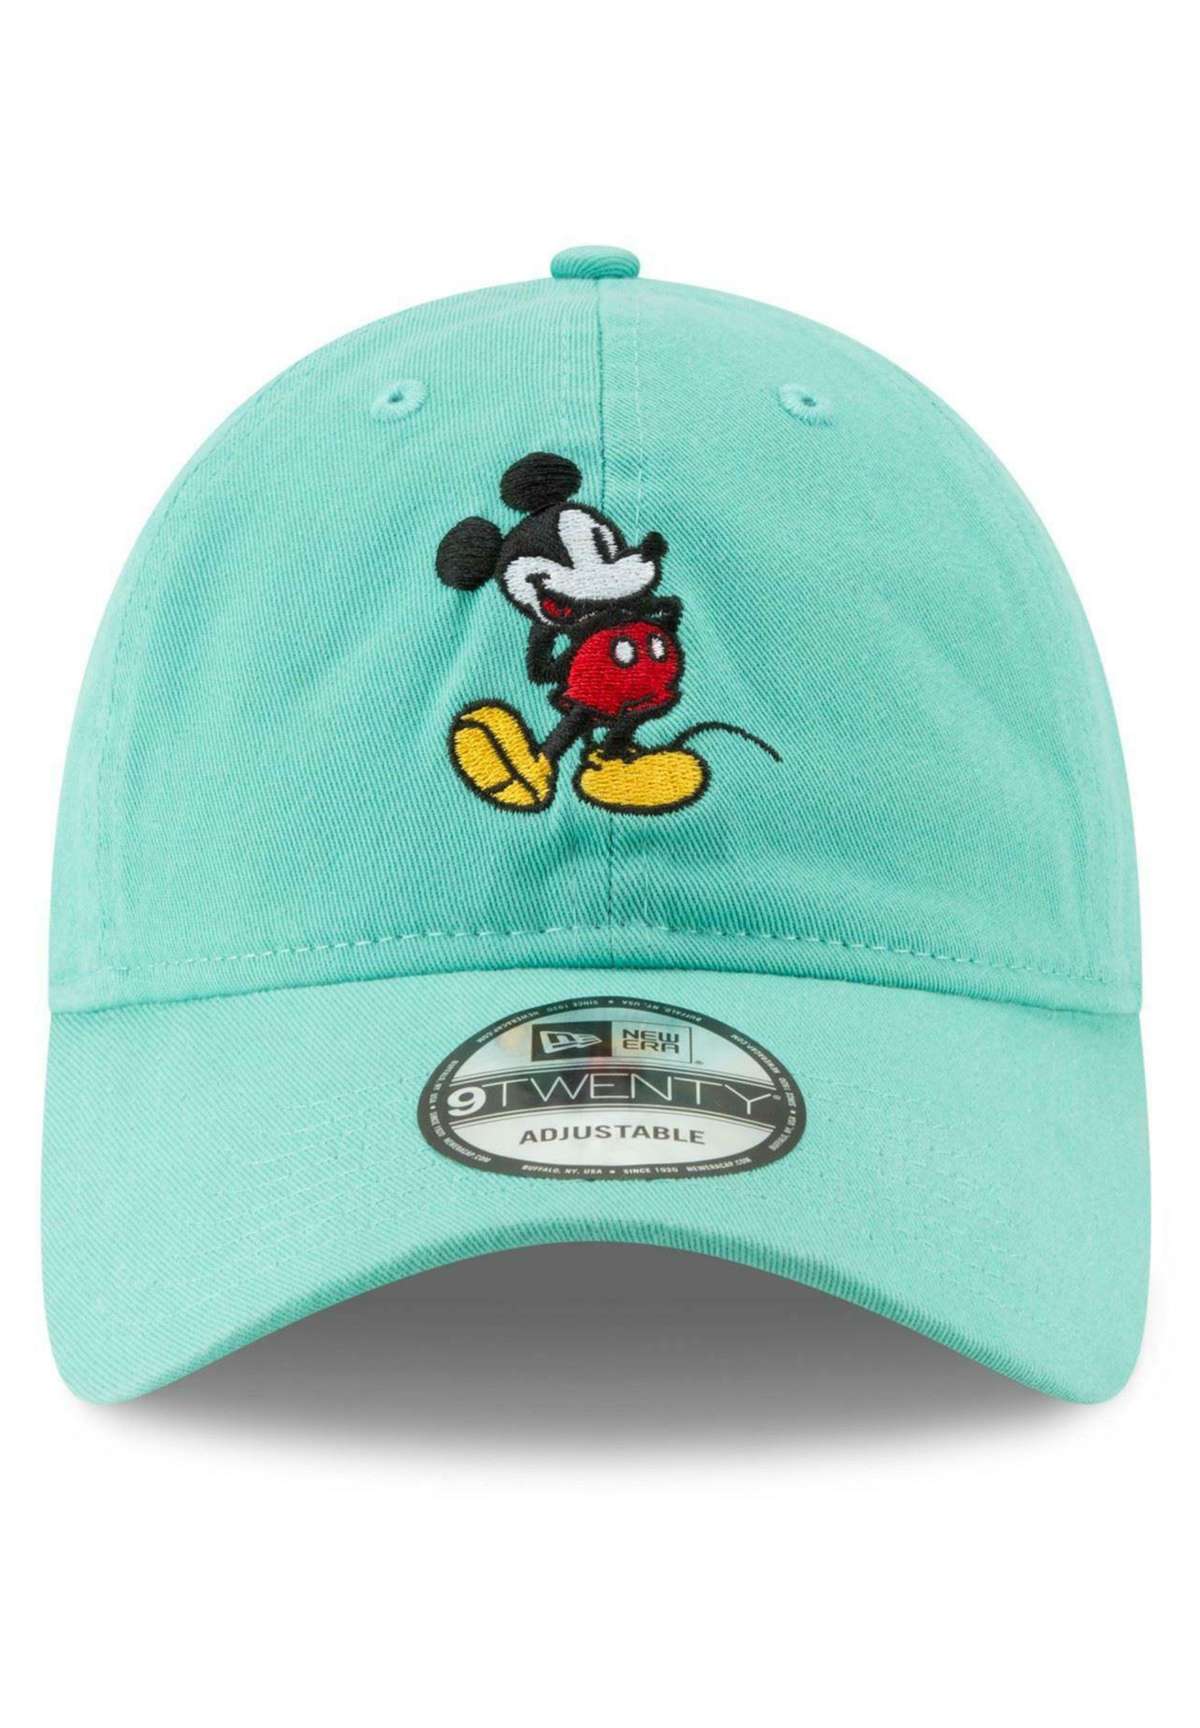 Кепка MICKEY MOUSE CHARACATER MINT 9TWENTY UNSTRUCTURED STRAPBACK